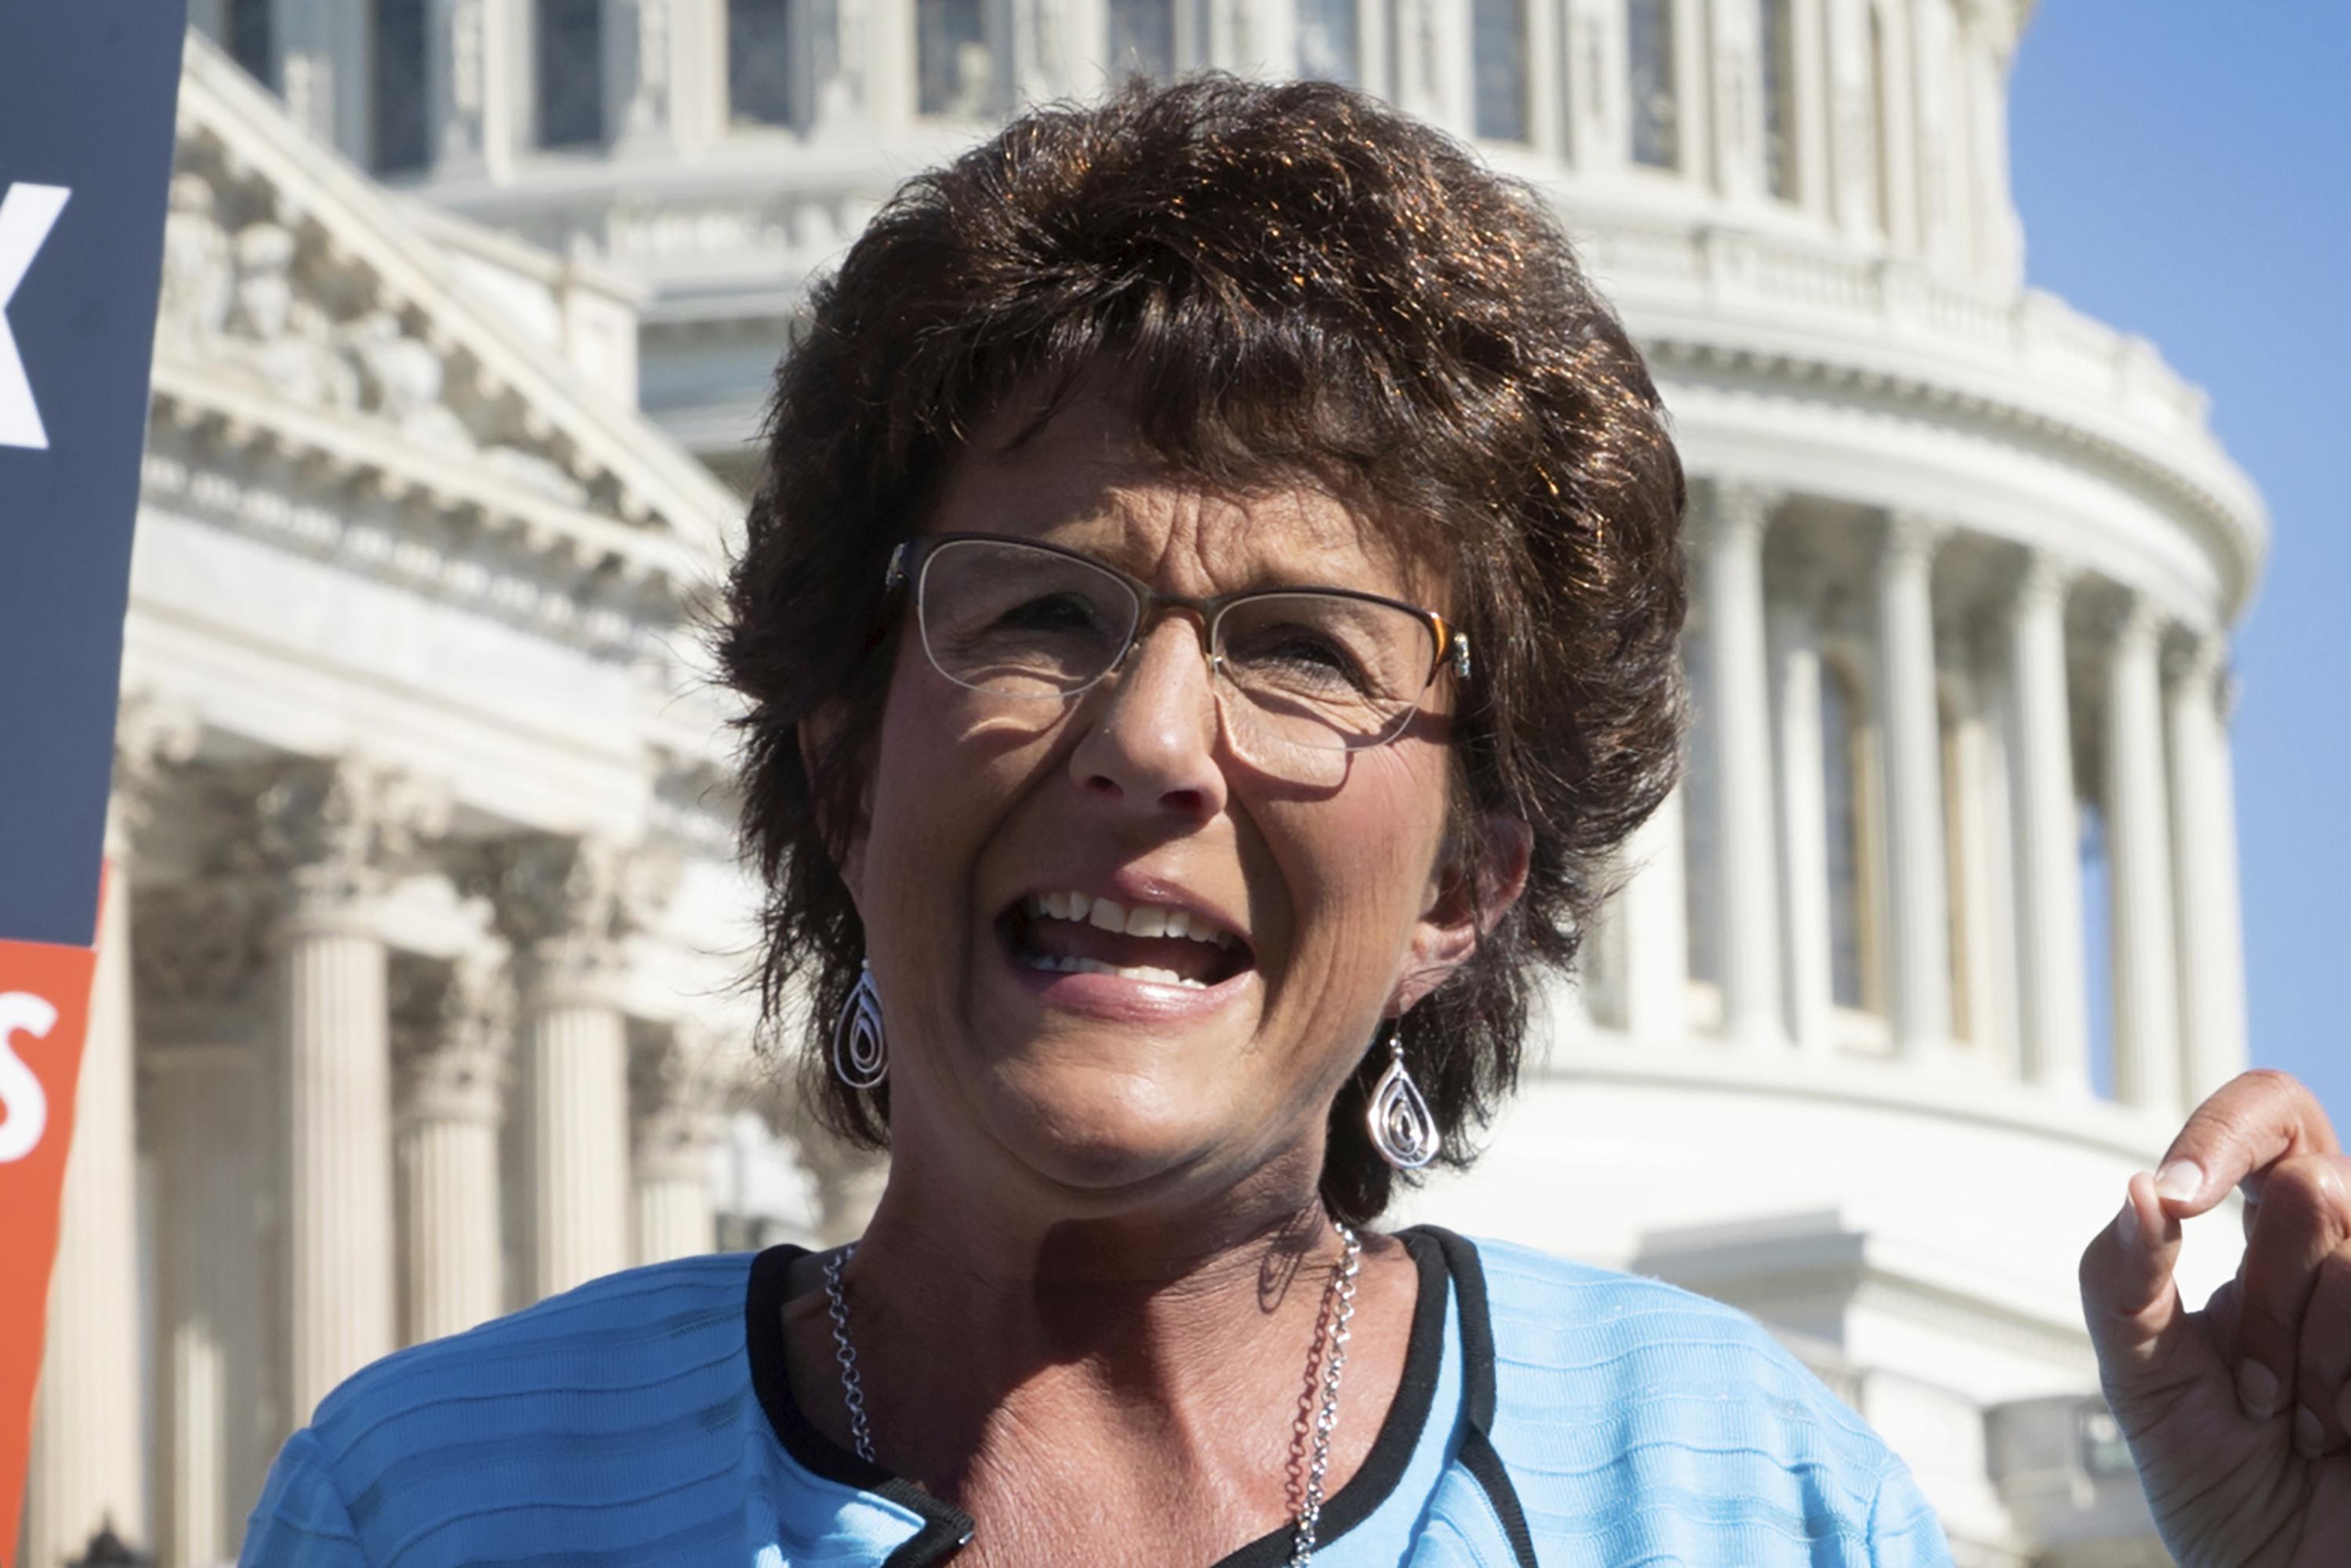 Rep. Walorski’s Indiana seat will stay vacant until November